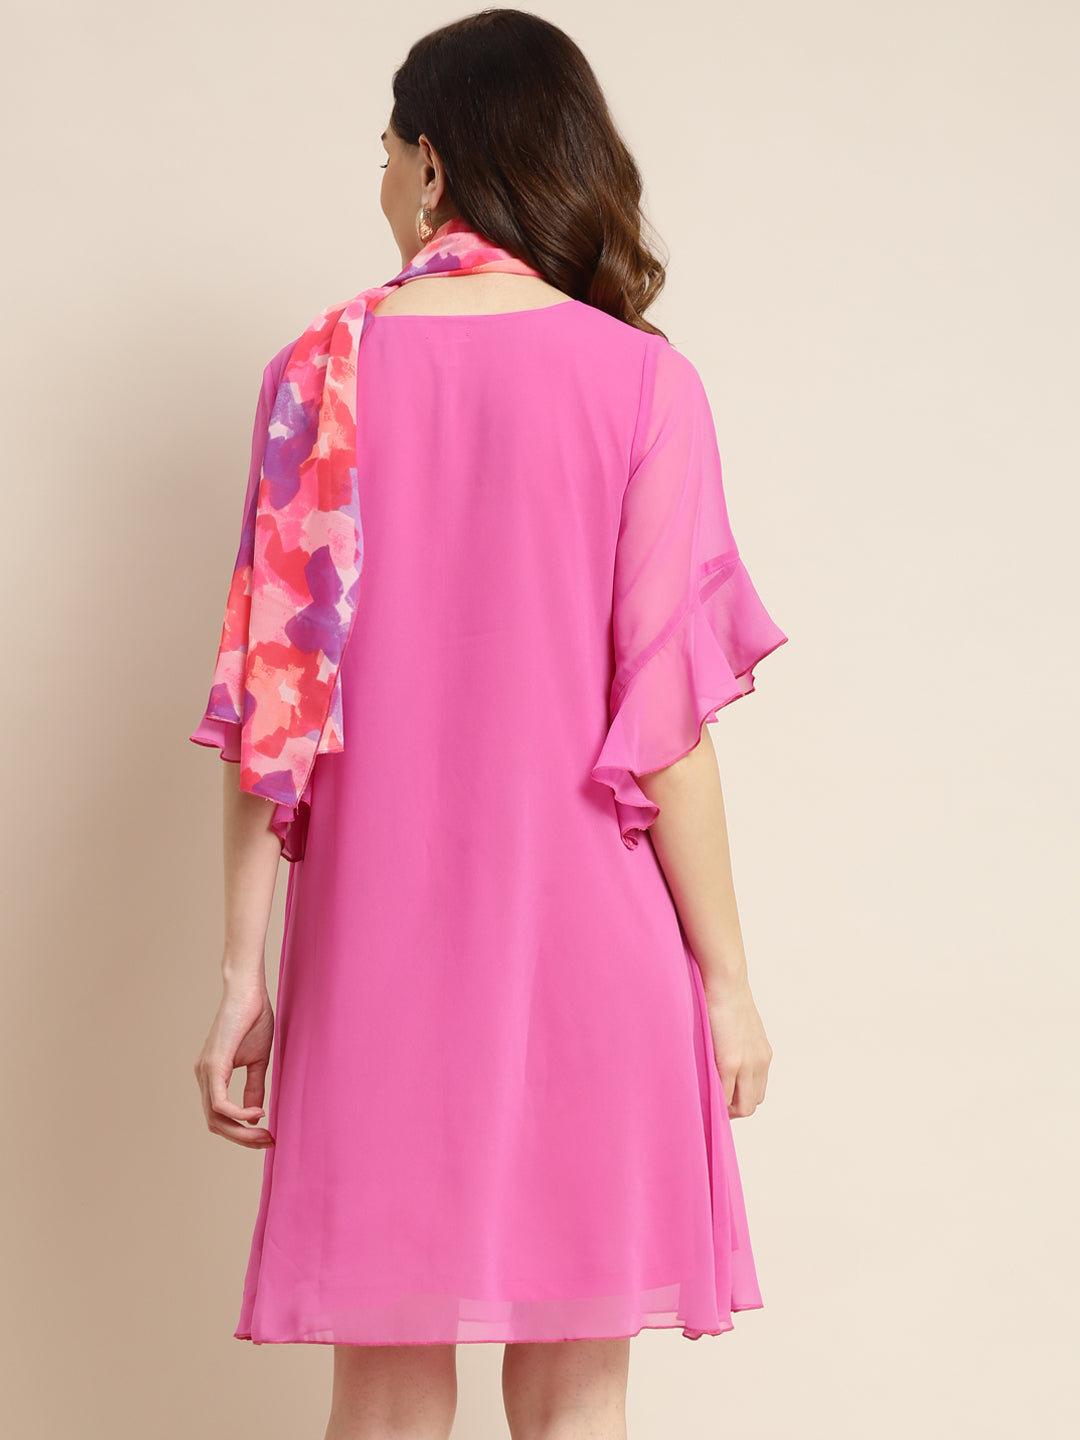 Solid Print Pastels Bright Mauve Relaxed Fit V Neck Three Quarter Bell Sleeve Georgette Dress